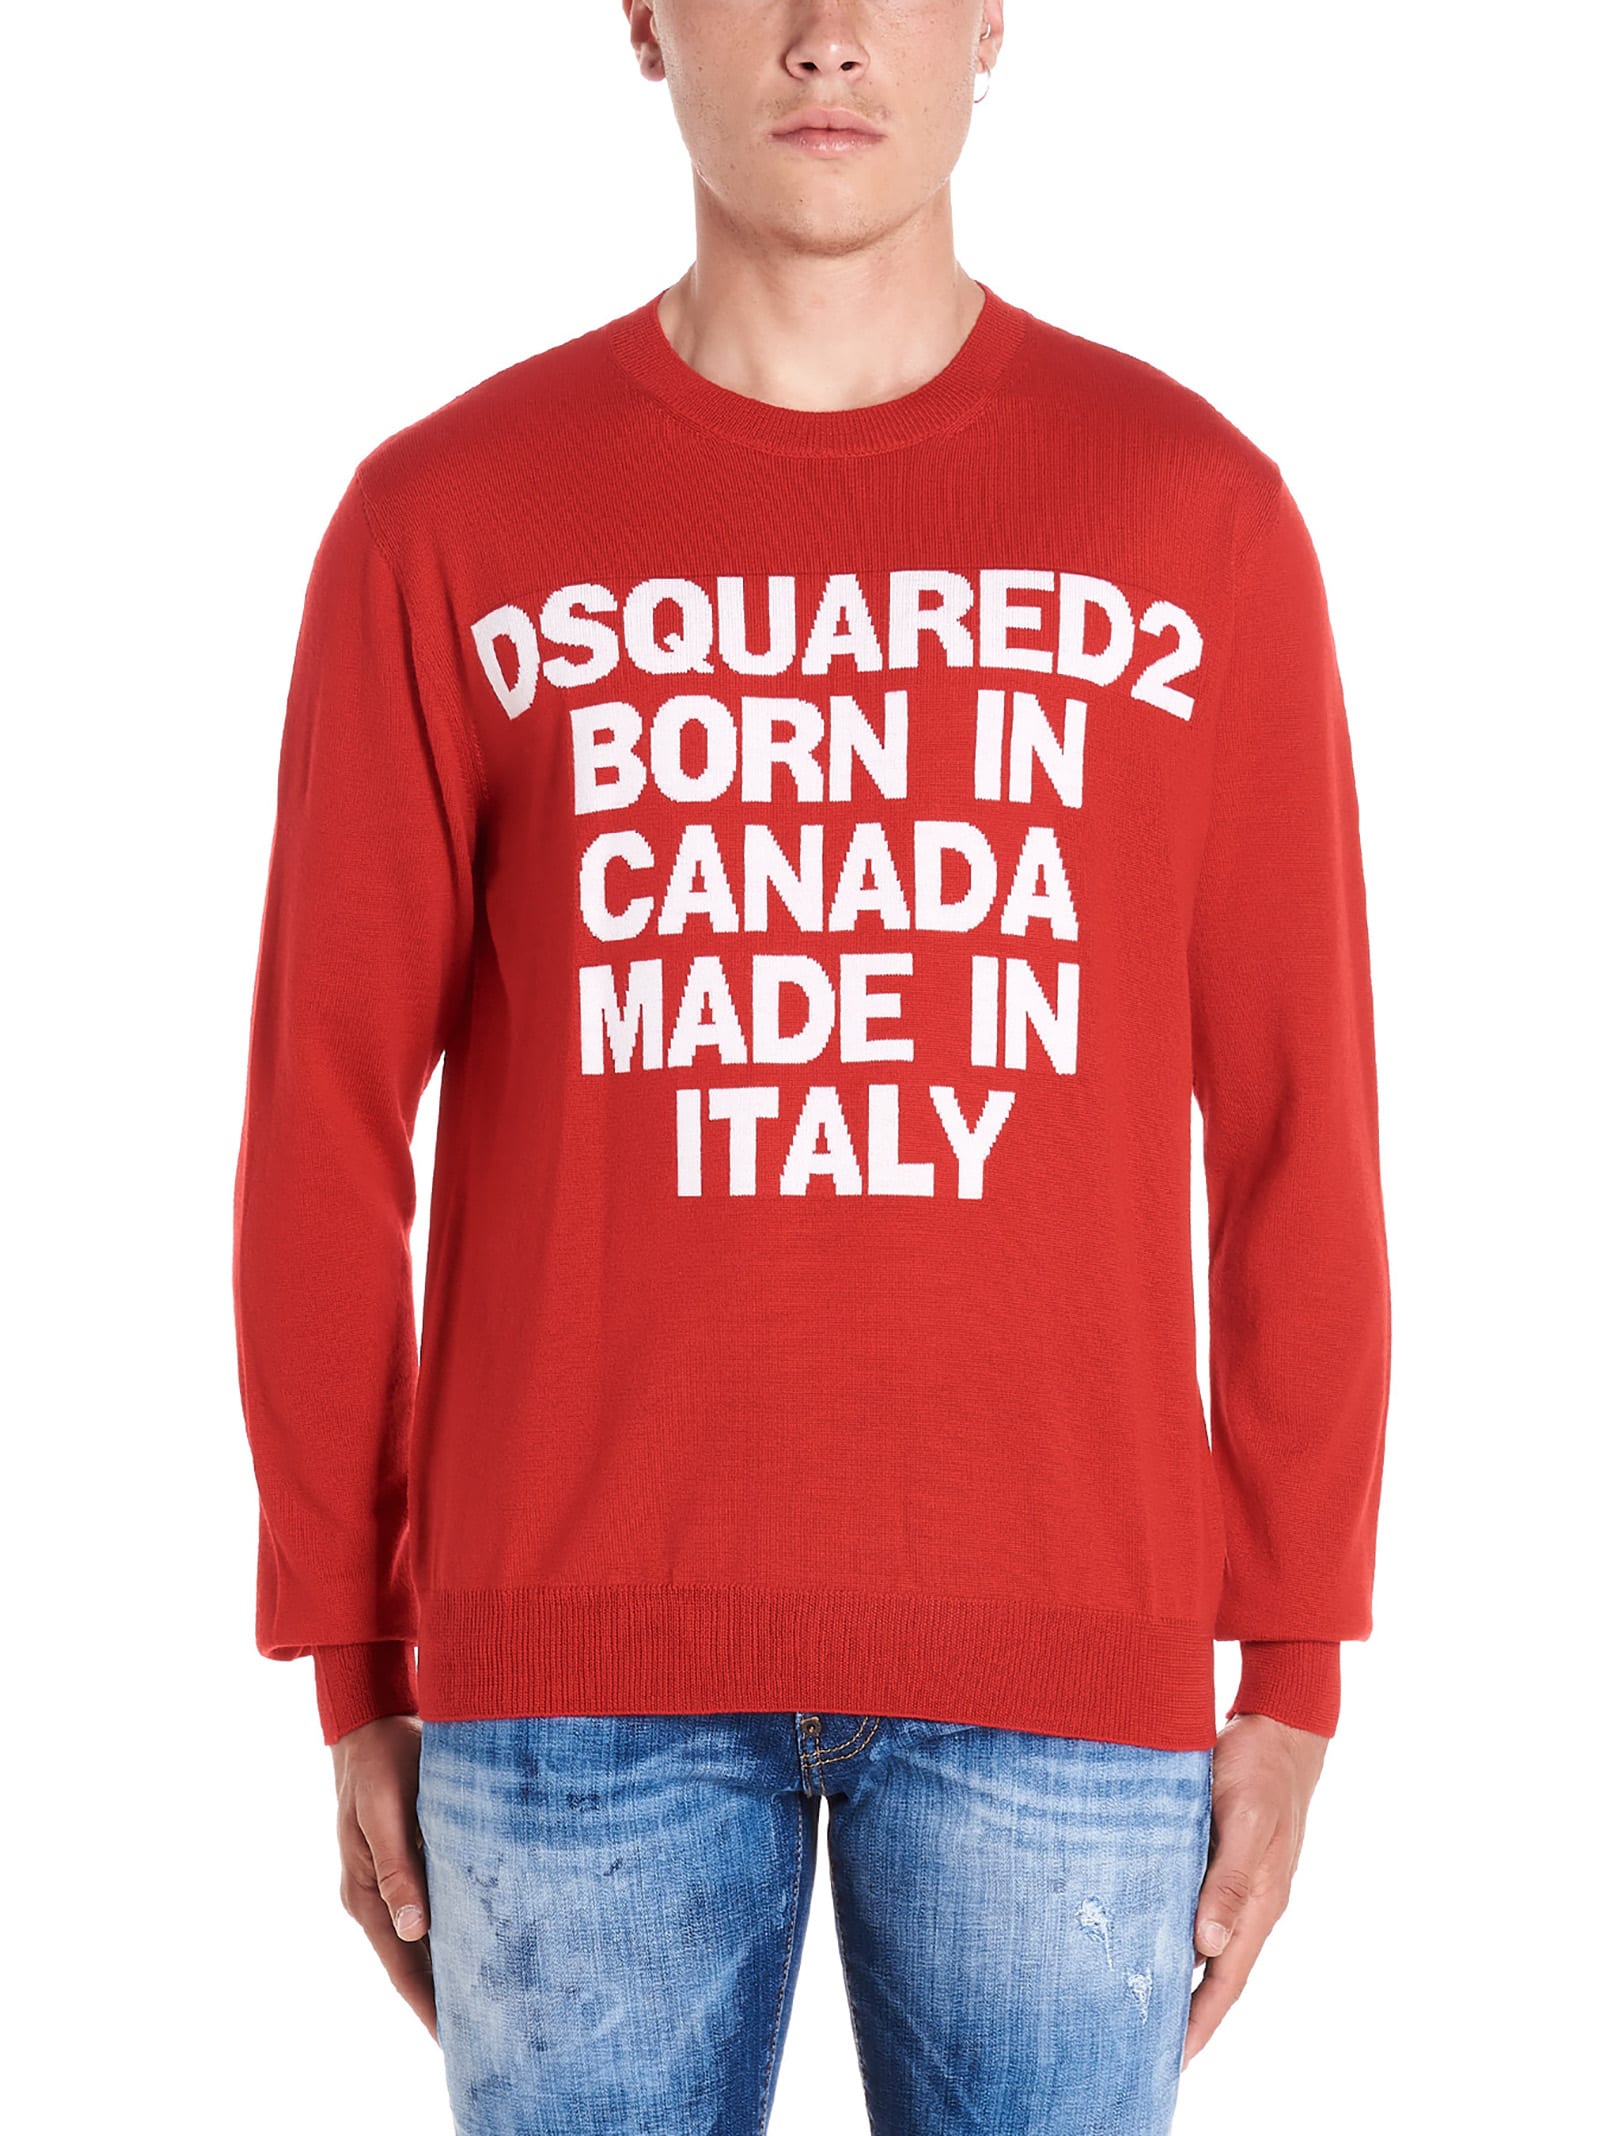 dsquared born in canada made in italy